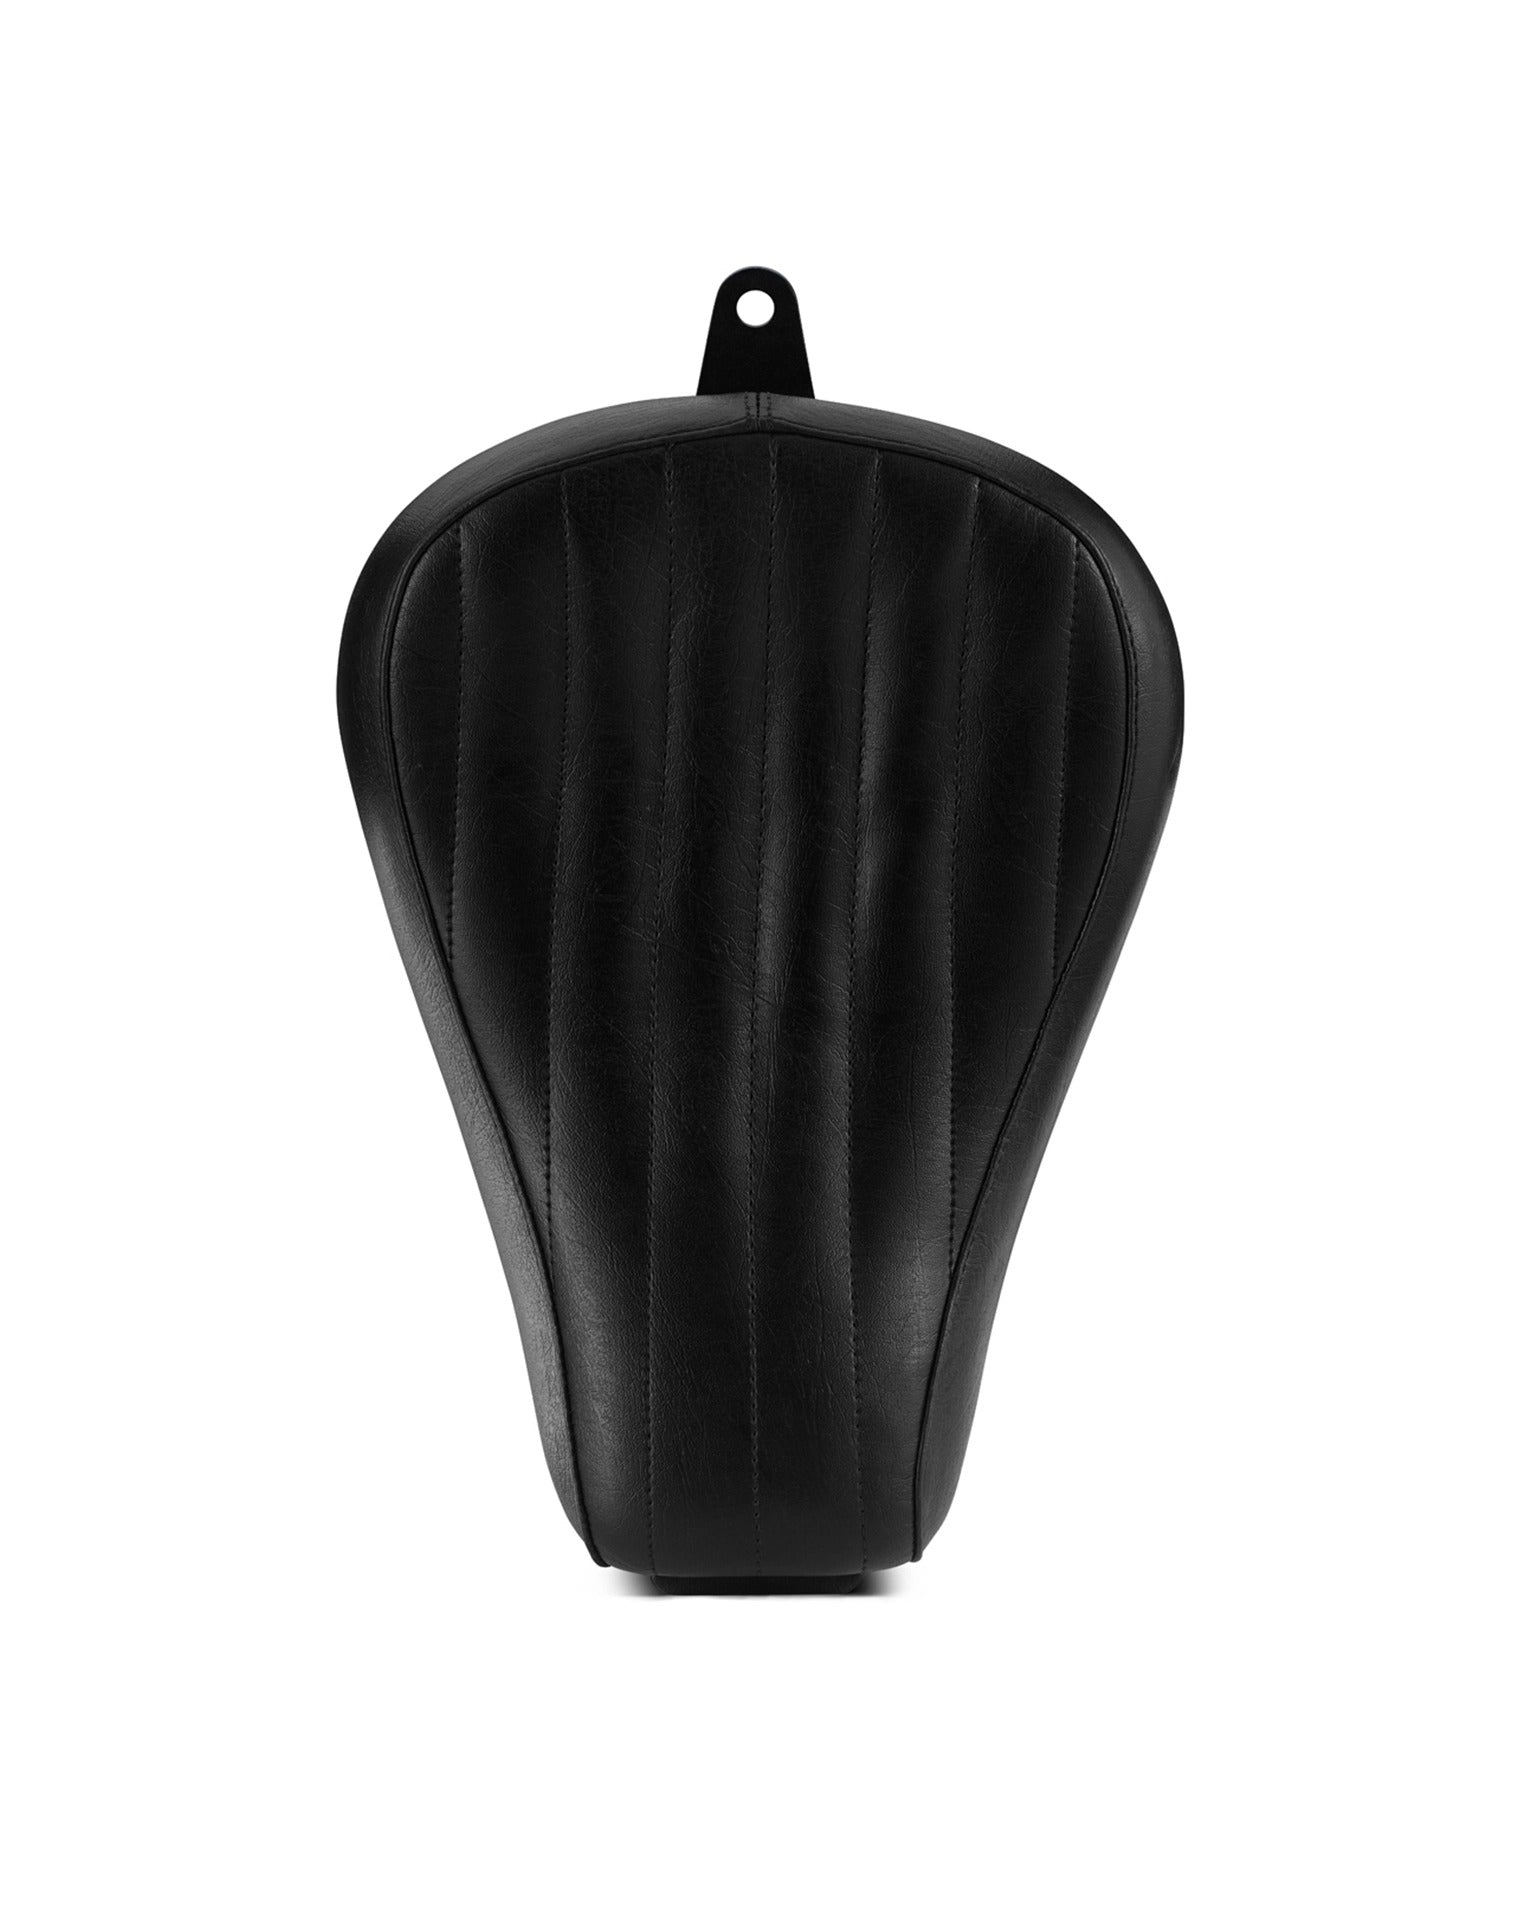 Iron Born Vertical Stitch Motorcycle Solo Seat for Harley Sportster 1200 Nightster XL1200N Front View